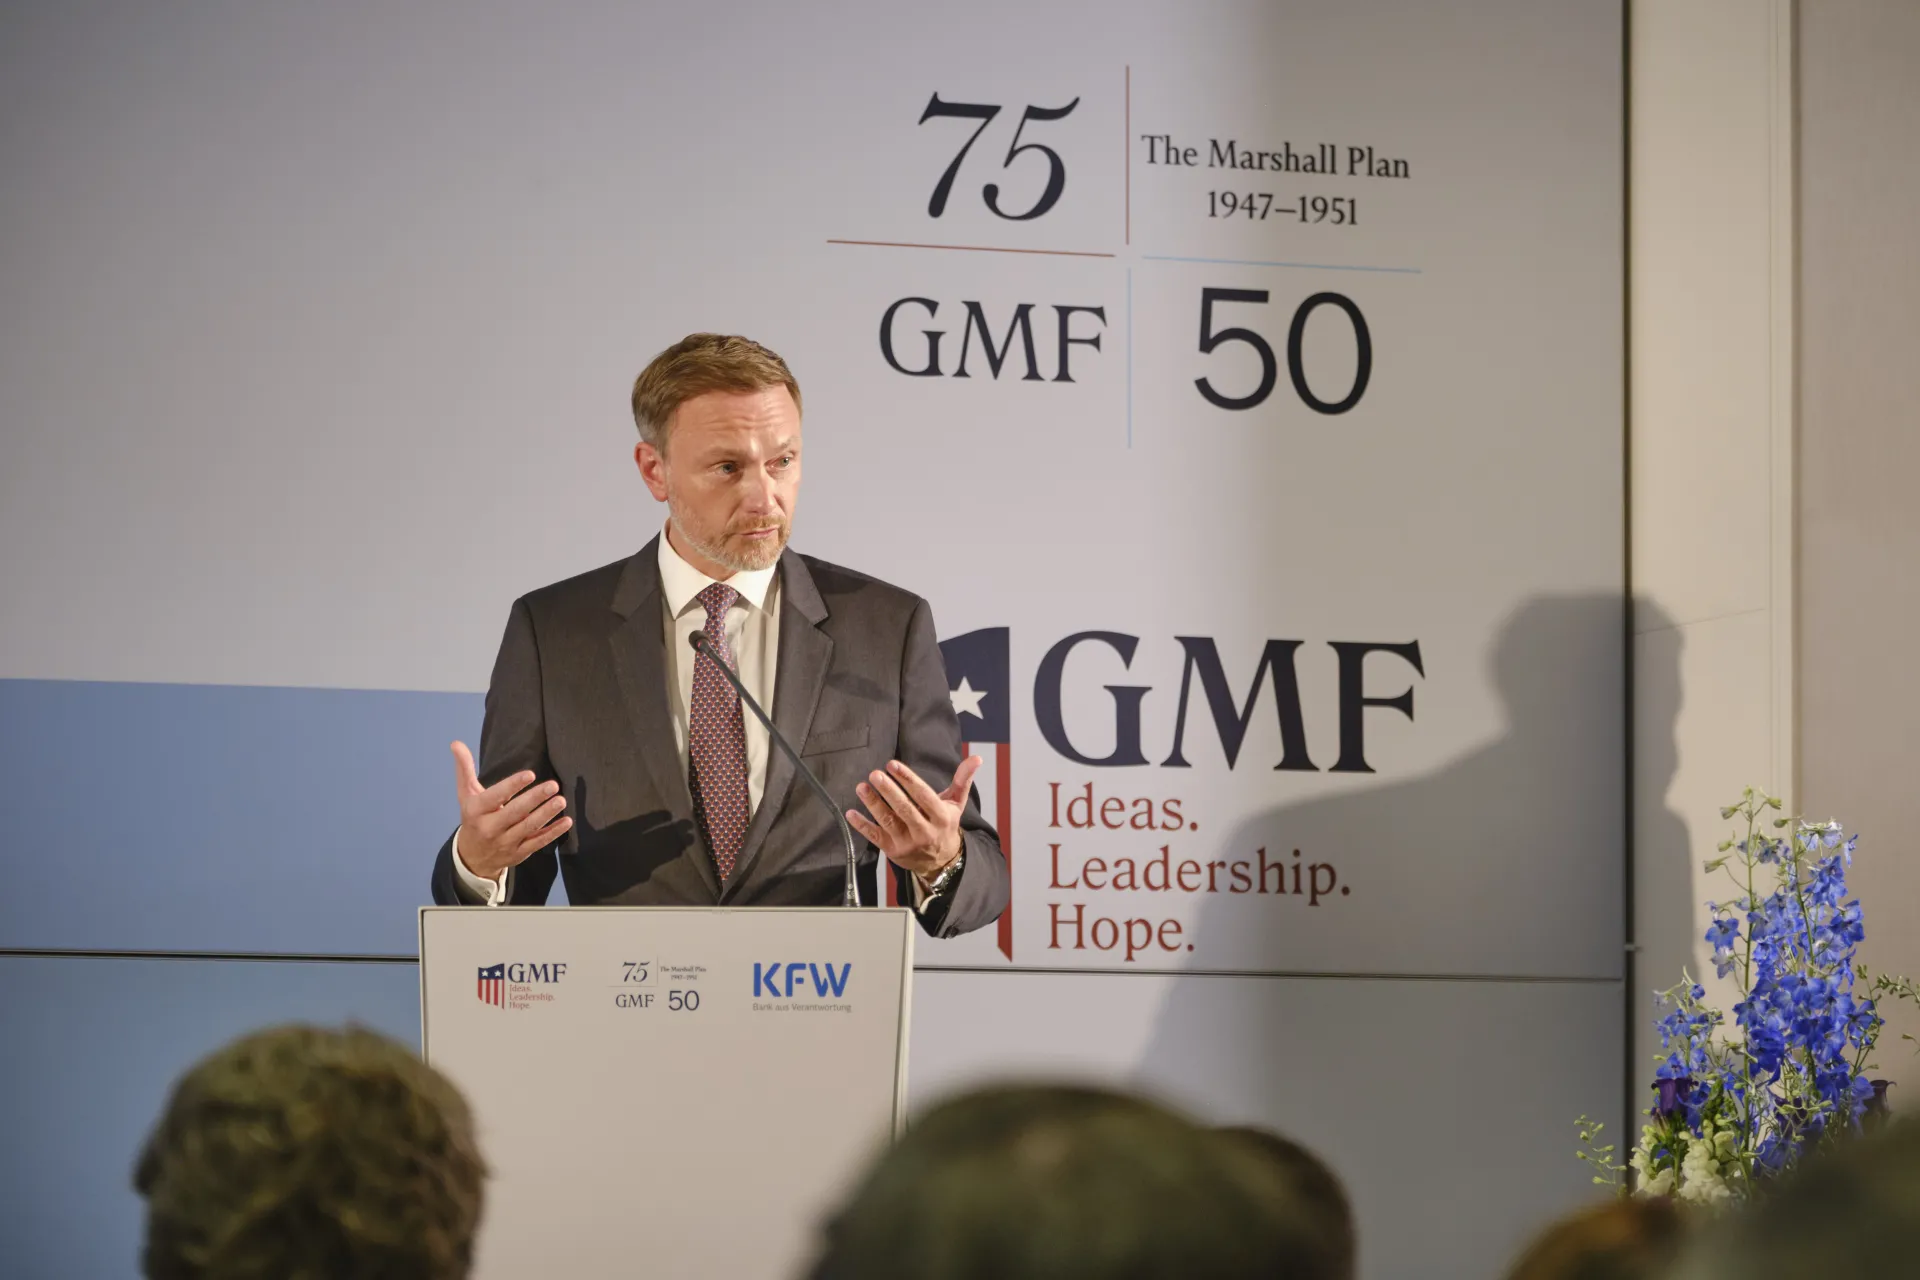 Christian Lindner speaking @KfW, May 2022